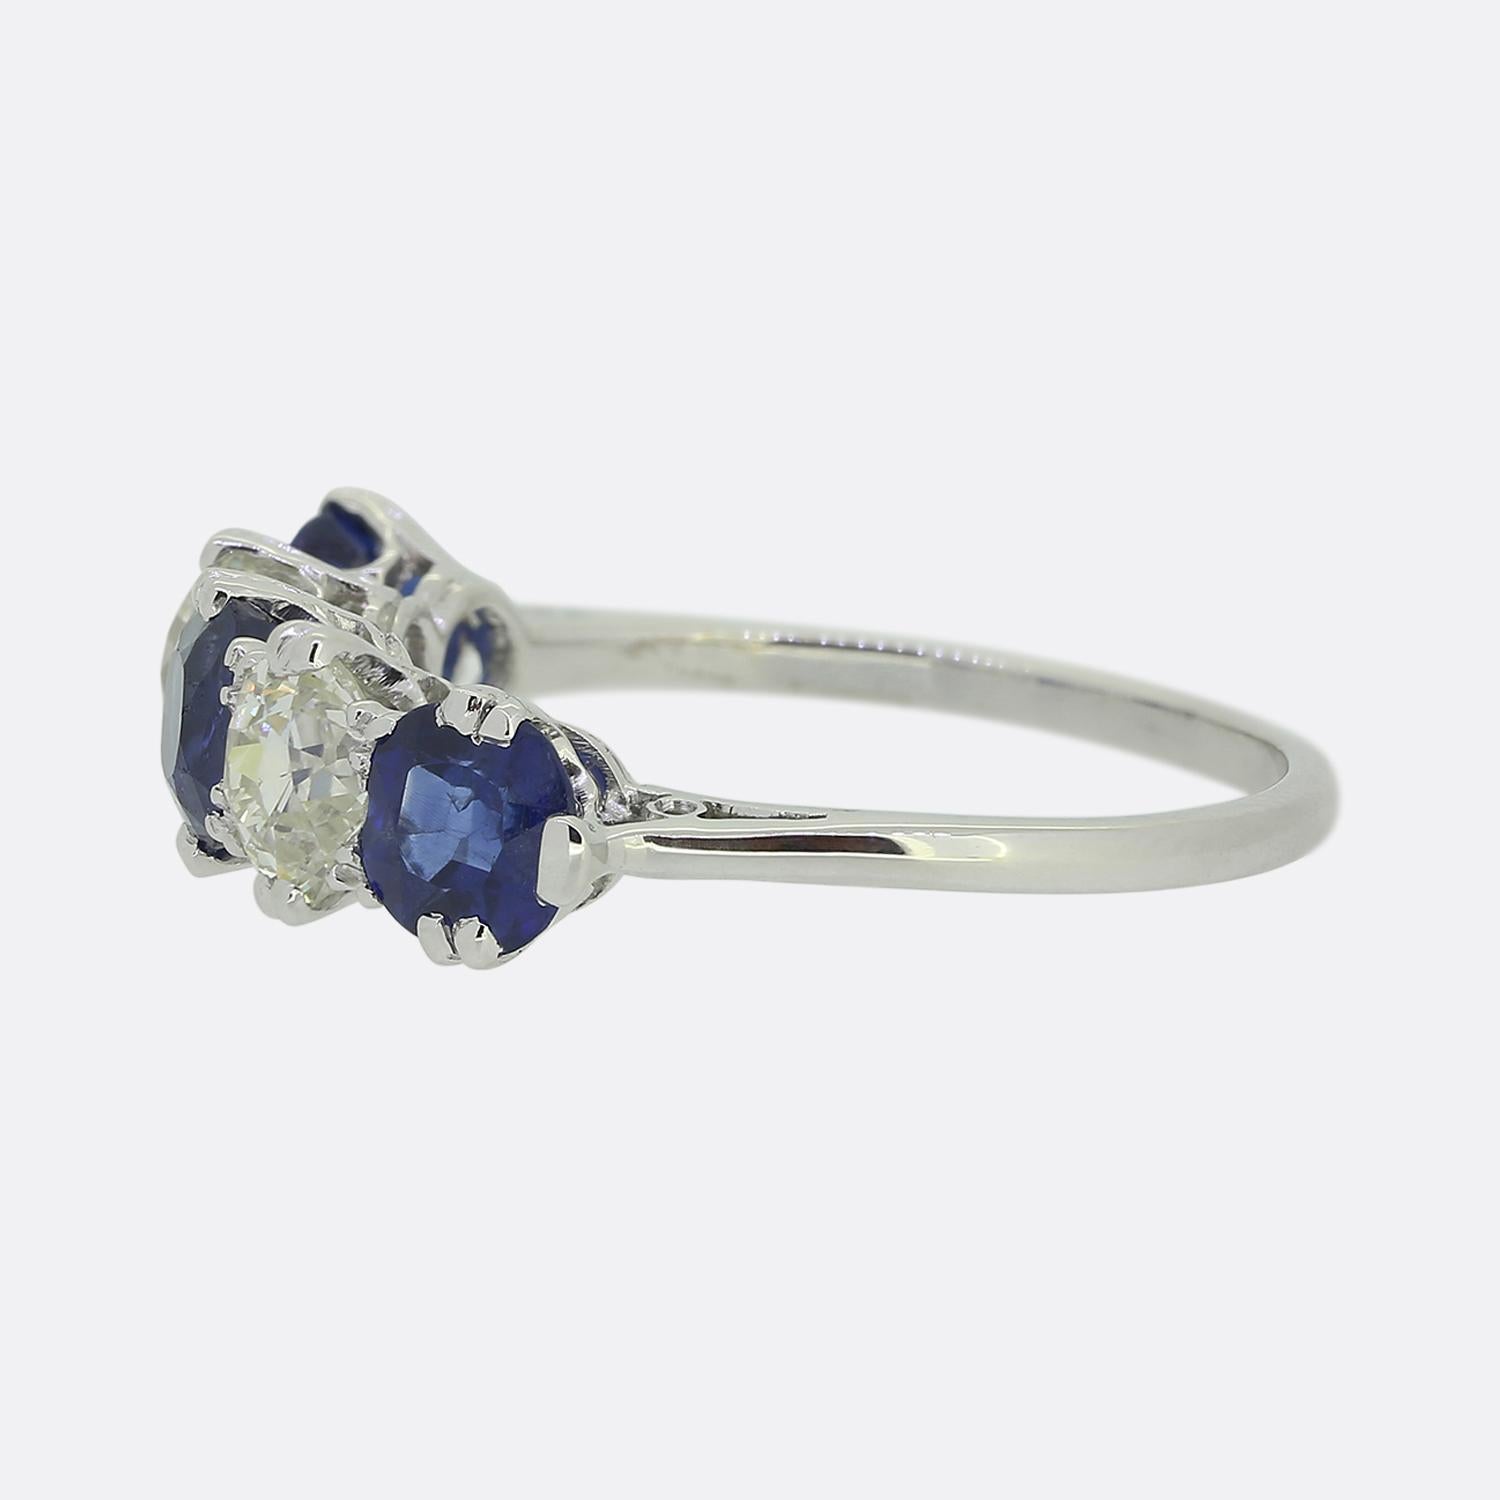 Here we have a classically styled five-stone ring. This vintage piece has been crafted from platinum and showcases an alternating array of sapphires and diamonds in a slight concave single line formation. A trio of excellently matched, cornflower